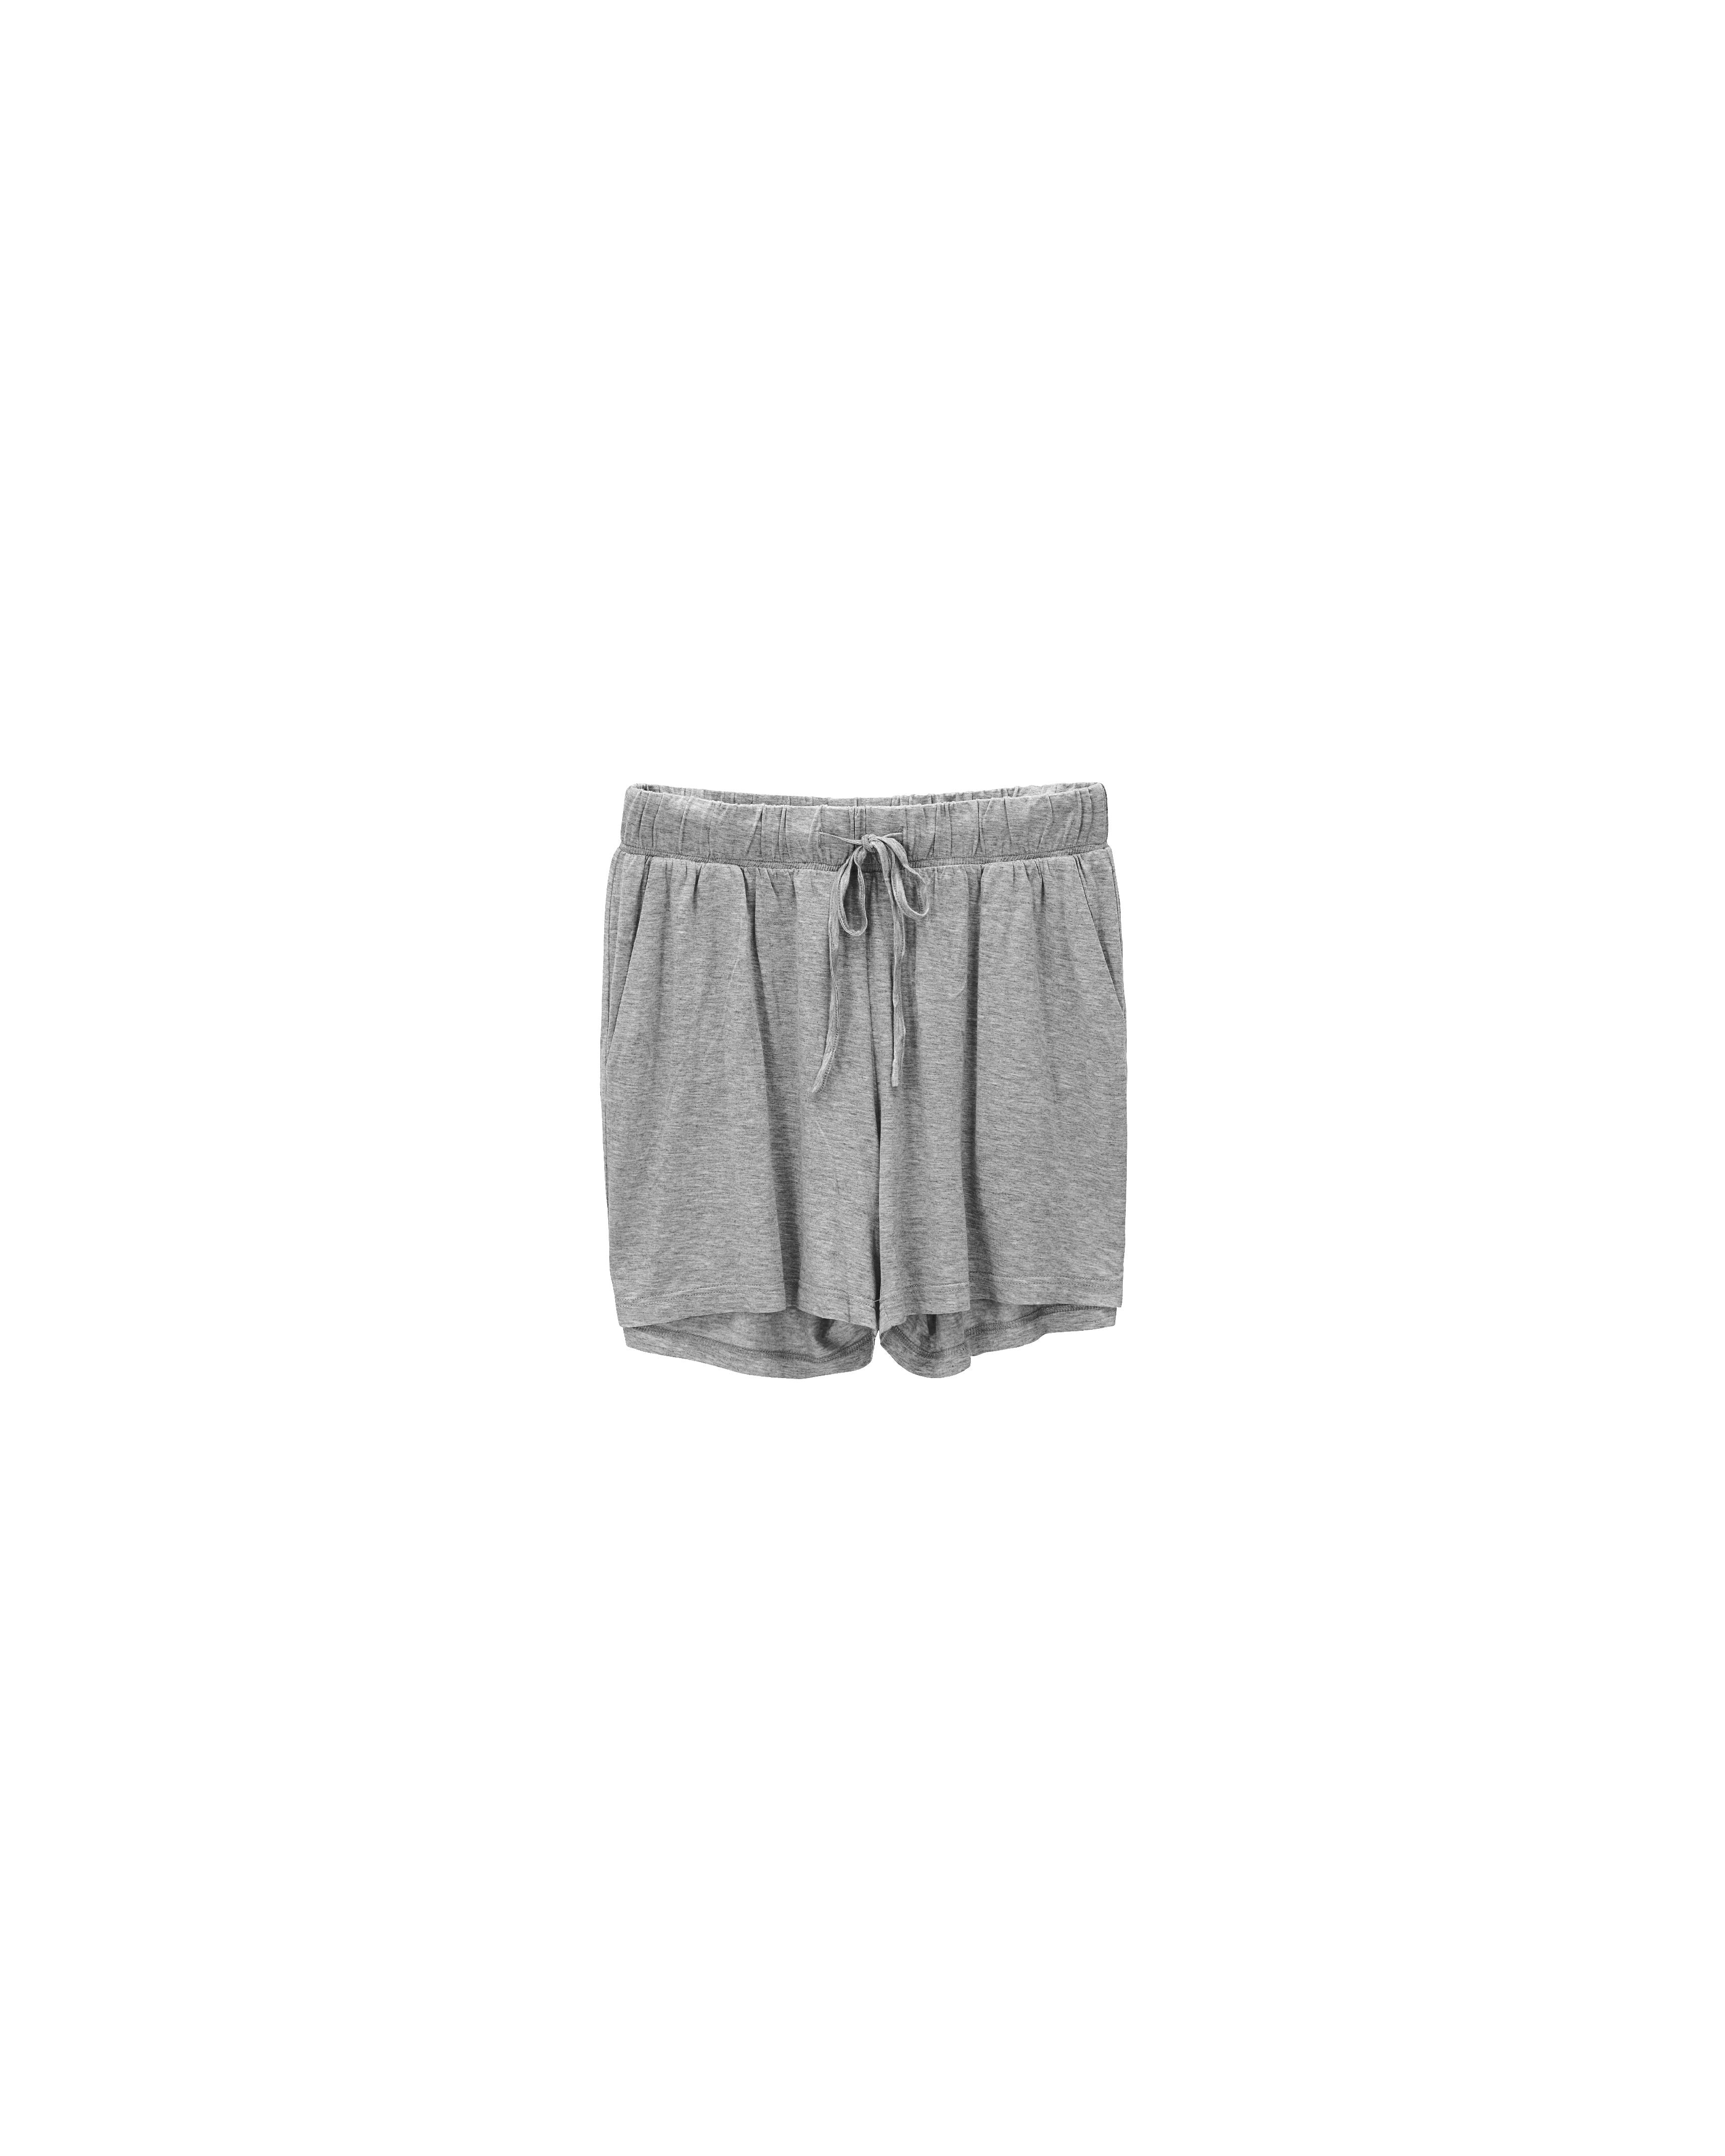 By Nord Summer Astrid Loungewear S/M, Skirt